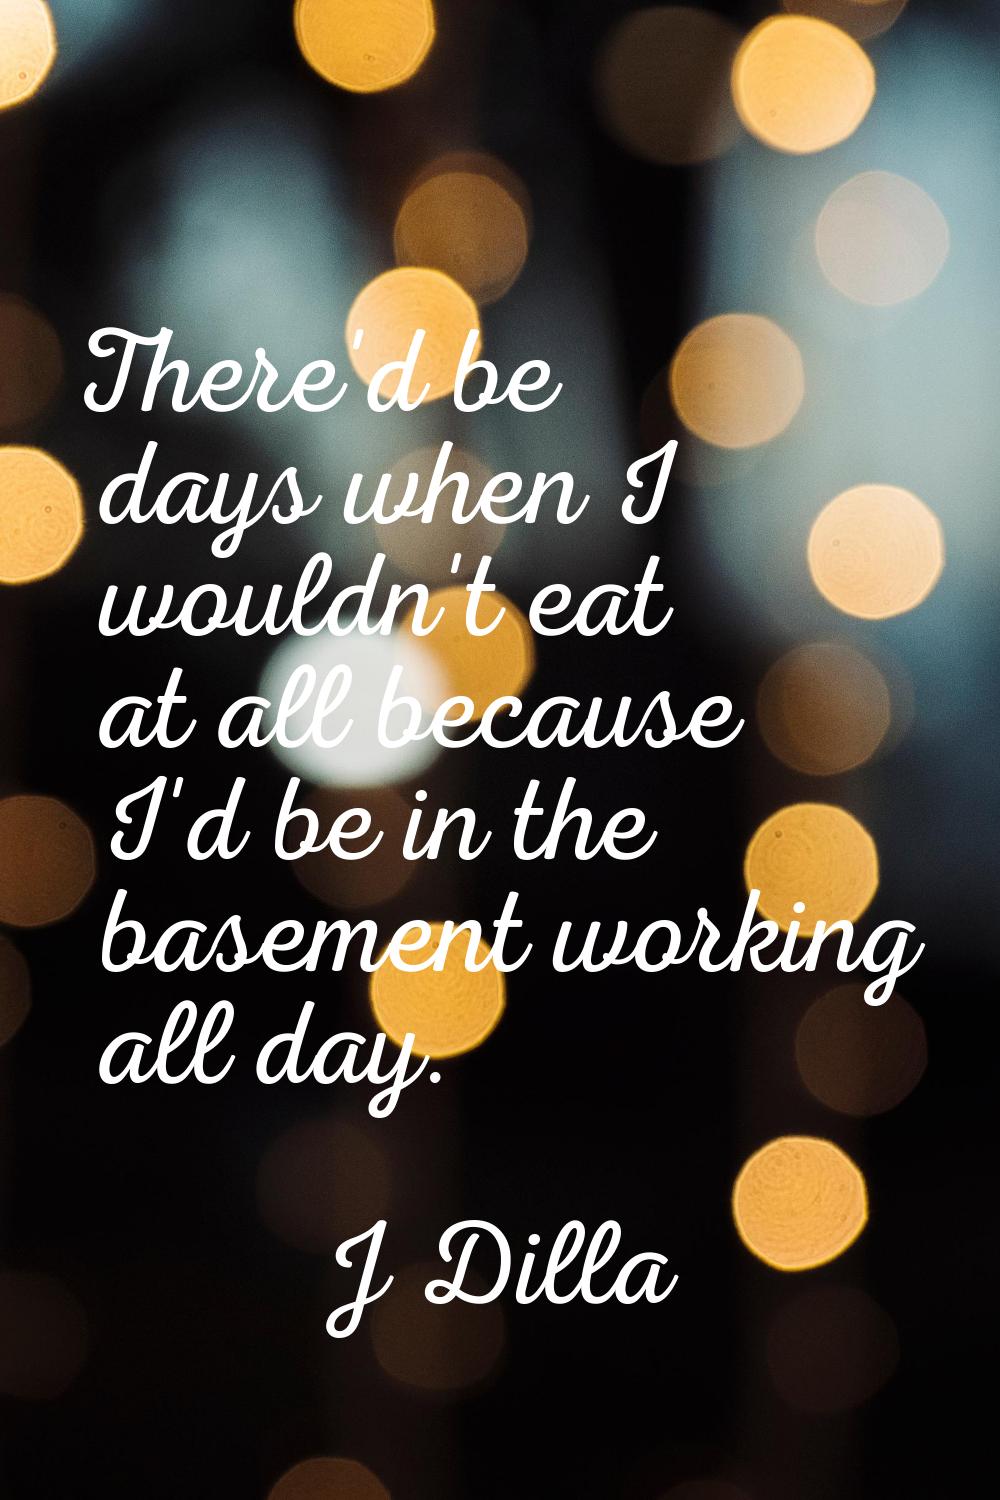 There'd be days when I wouldn't eat at all because I'd be in the basement working all day.